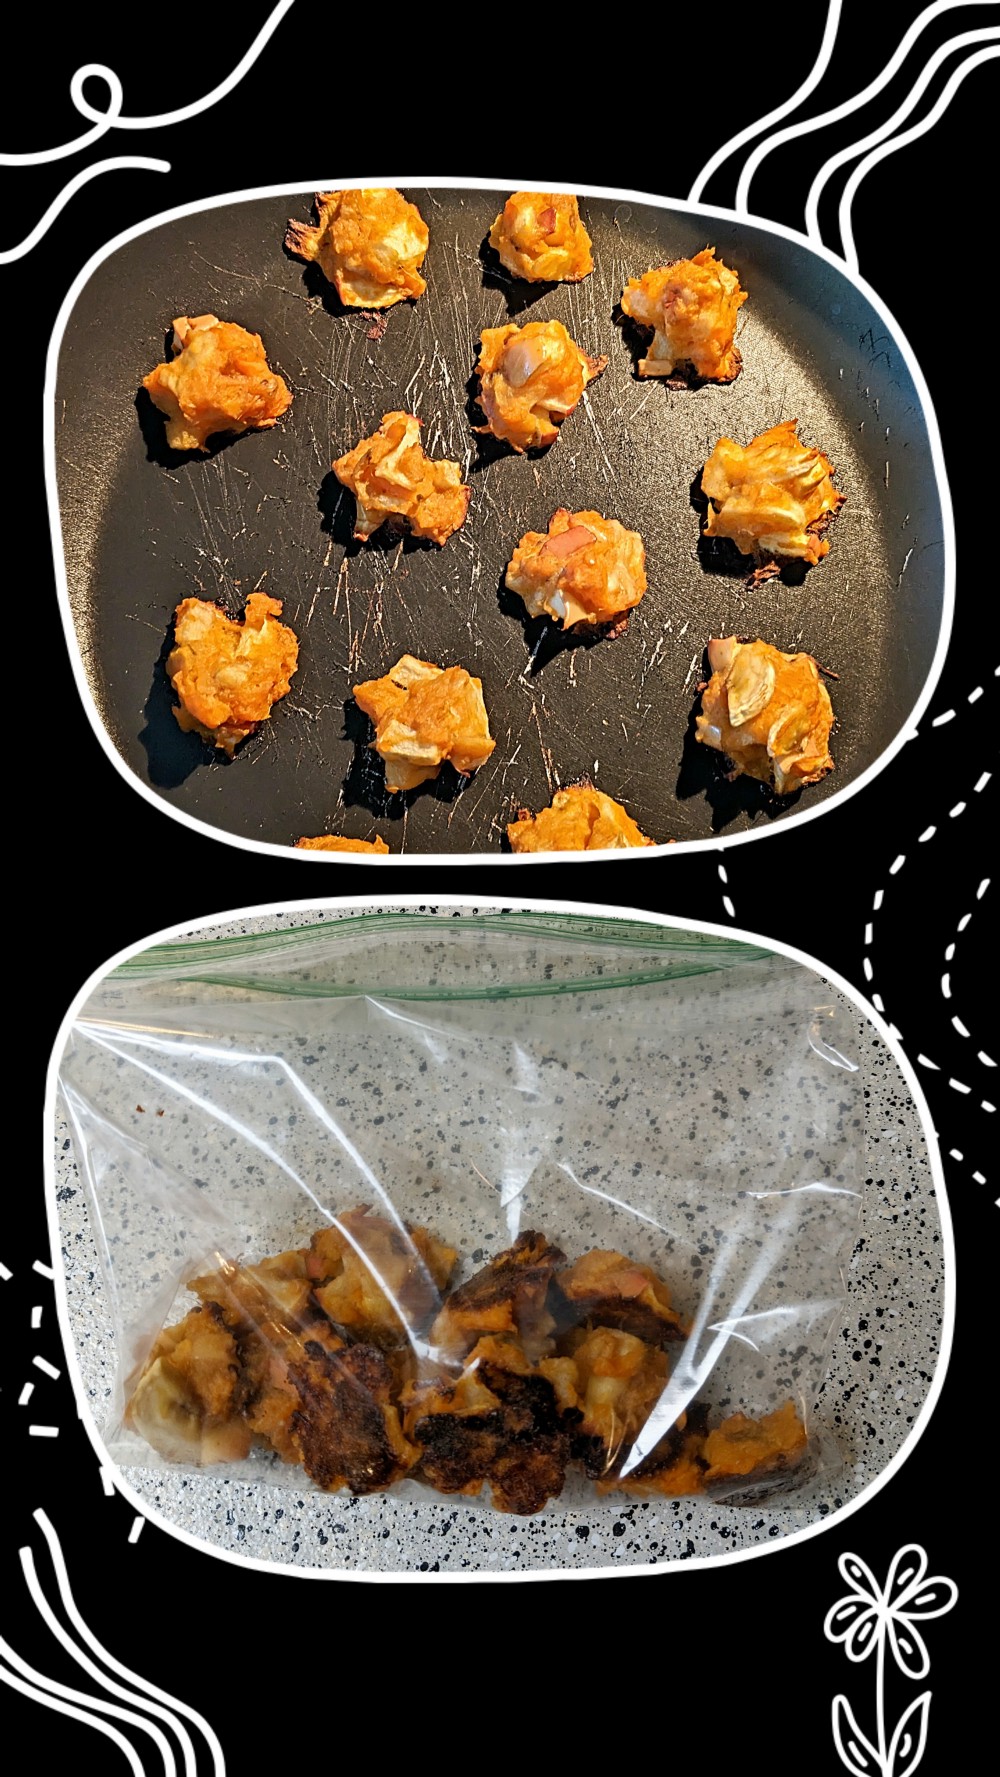 Homemade sweet potato, apple, and banana treats. Excuse the scratches in my favorite frying pan. It cooks the same! Photo Credit: Tremaine L. Loadholt